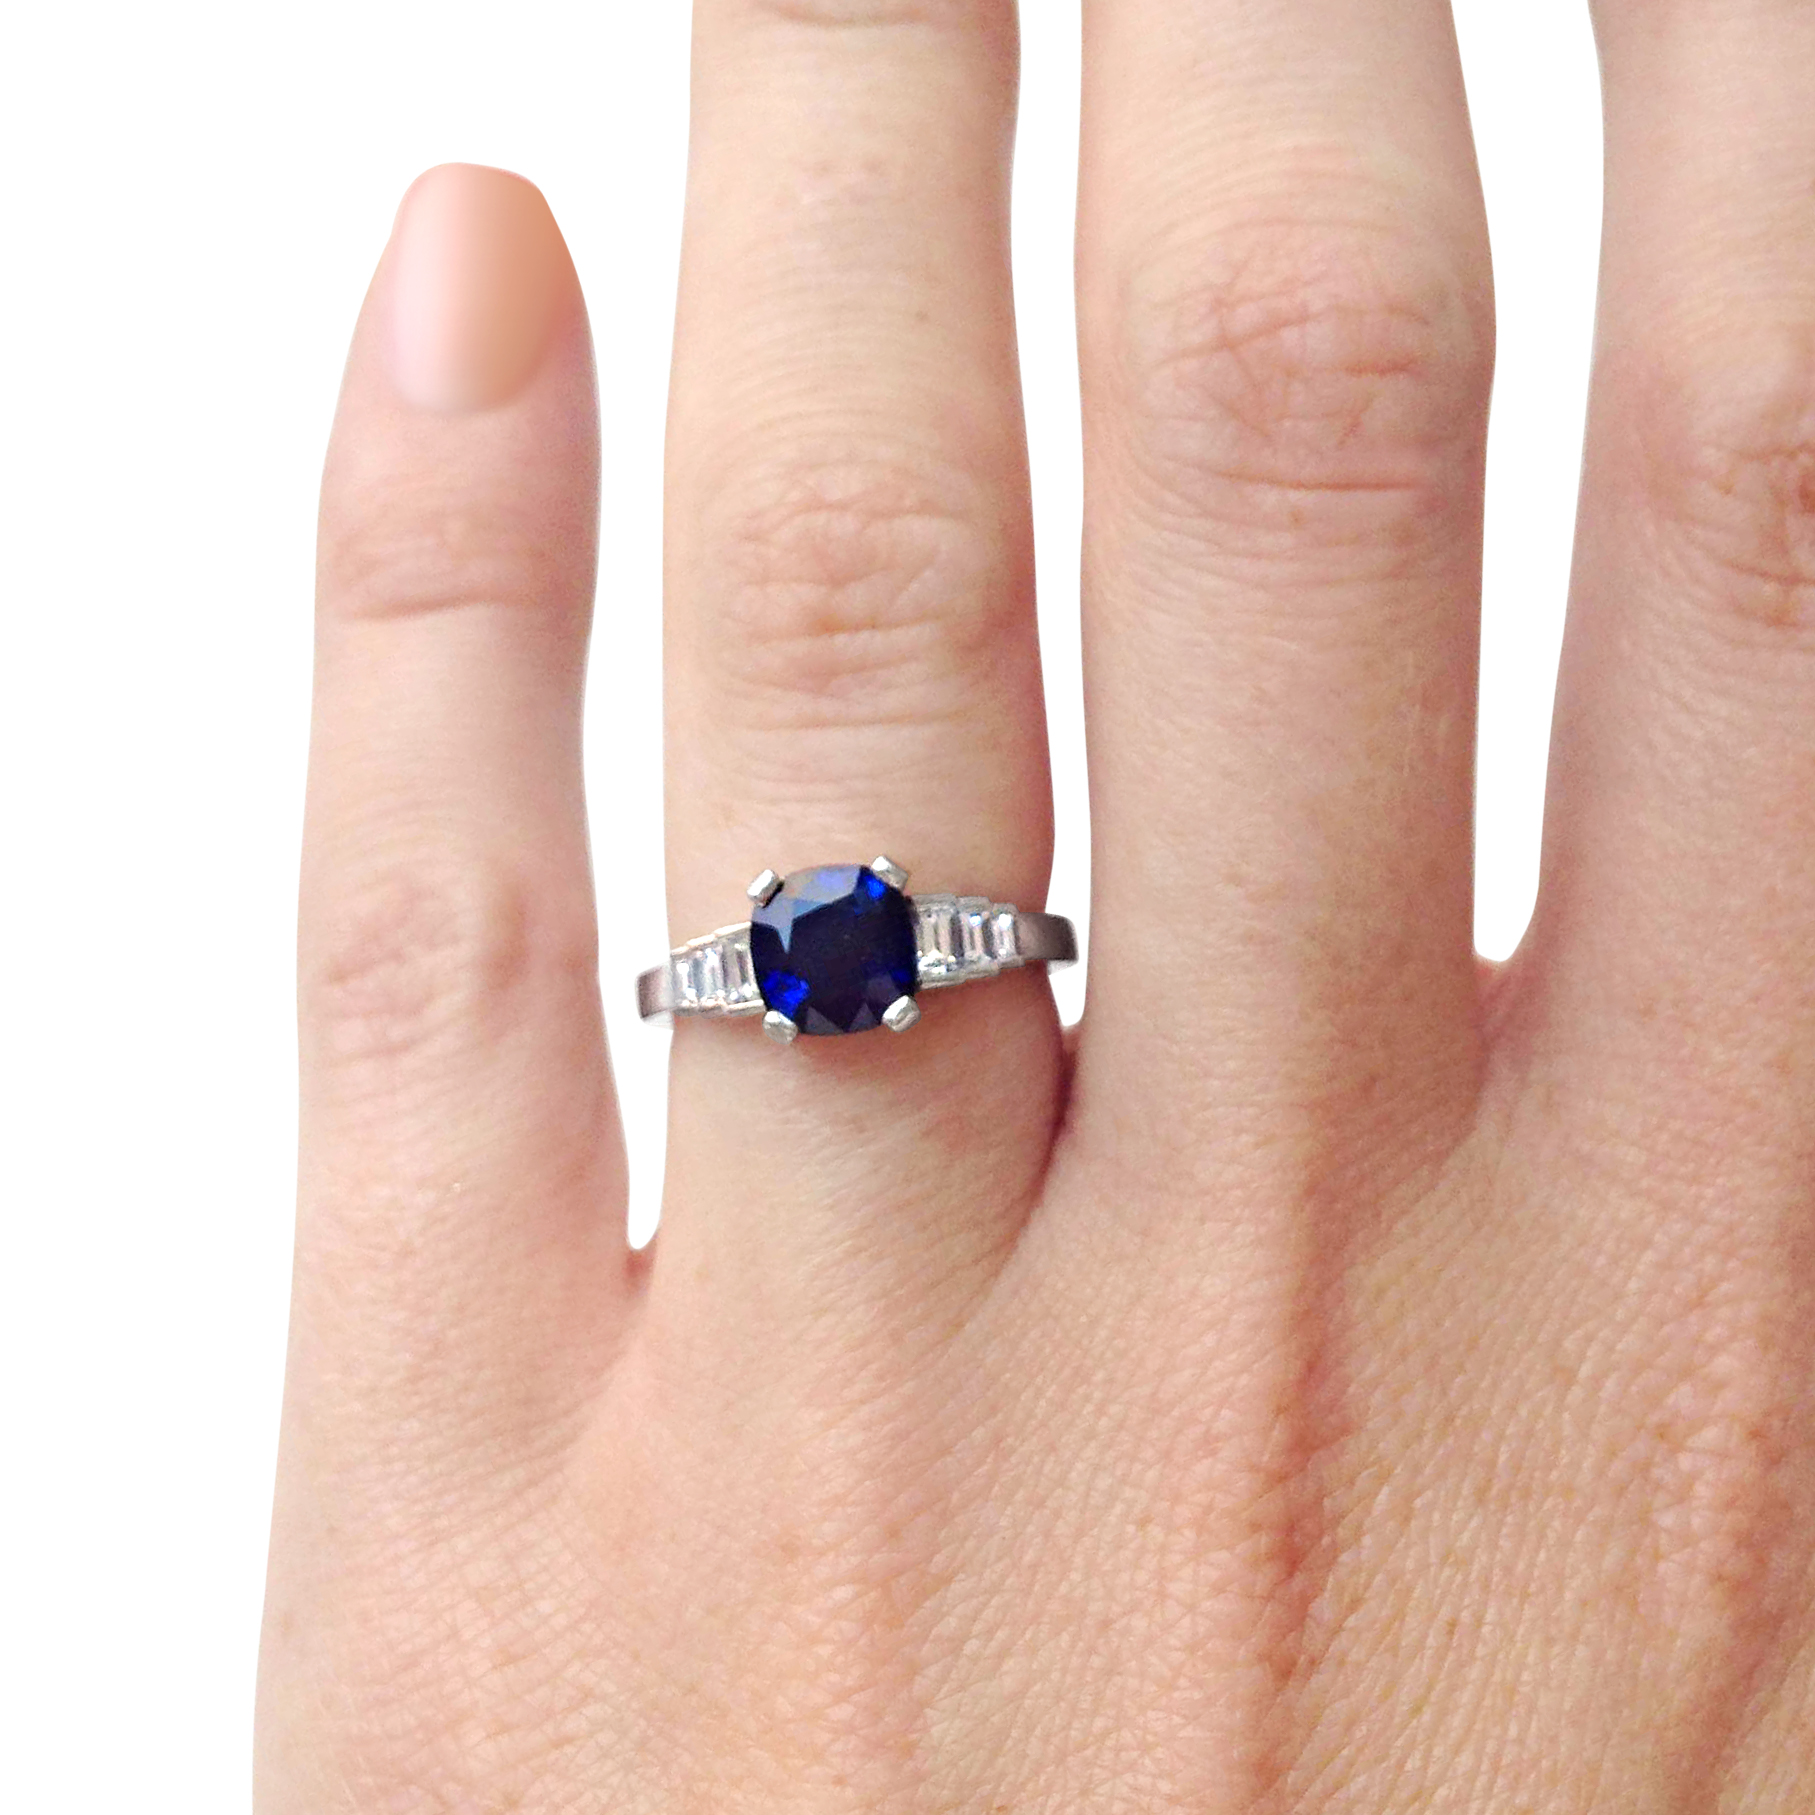 cushion-shaped-Sapphire-and-diamond-baguette-cut-ring-mounted-in-platinum-1.jpg